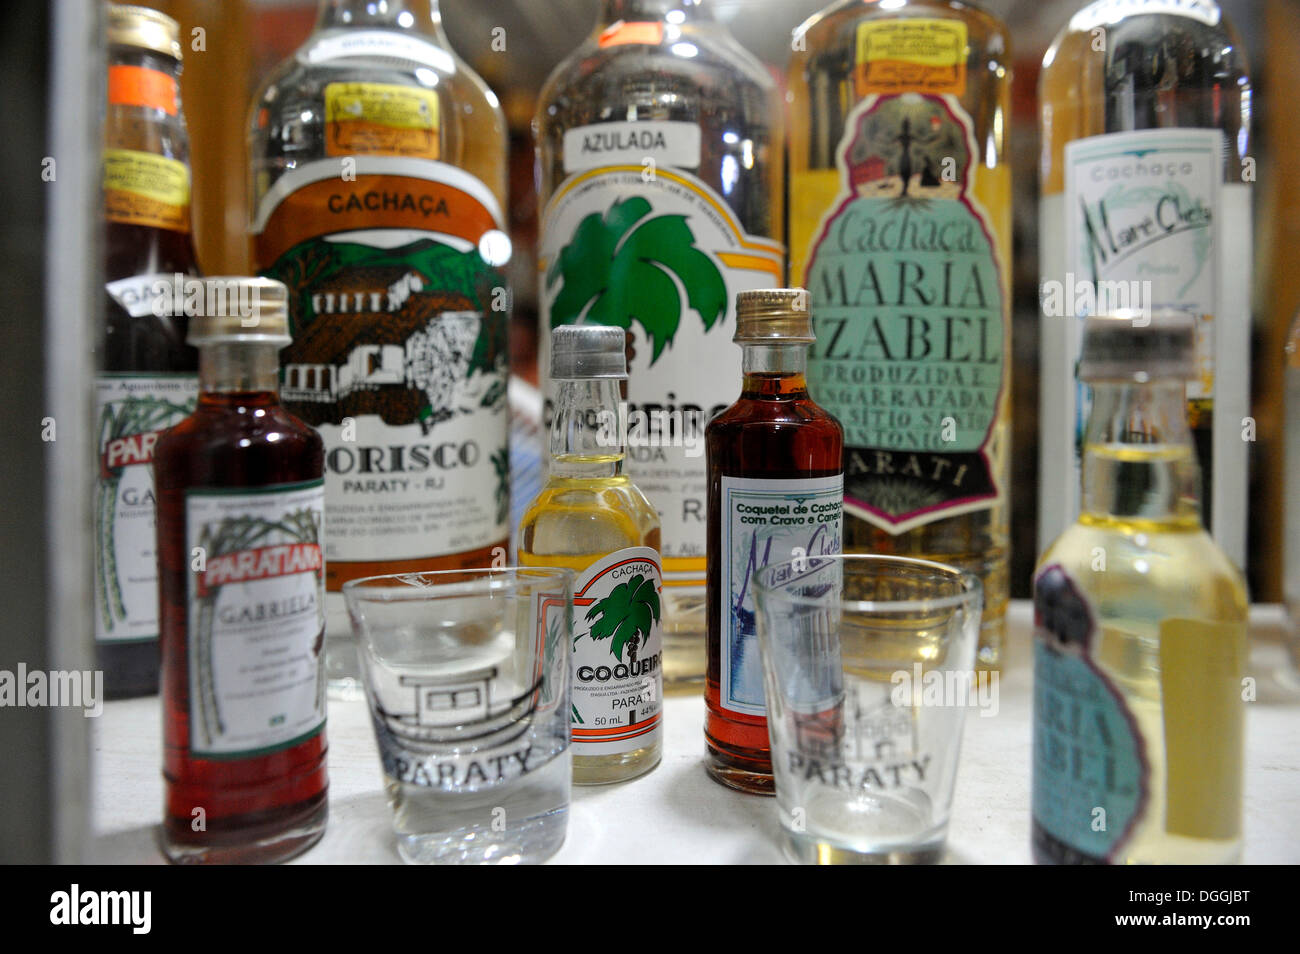 Cachaca, liquor made from fermented sugarcane juice, national drink of Brazil, on sale in a shop in Paraty or Parati Stock Photo